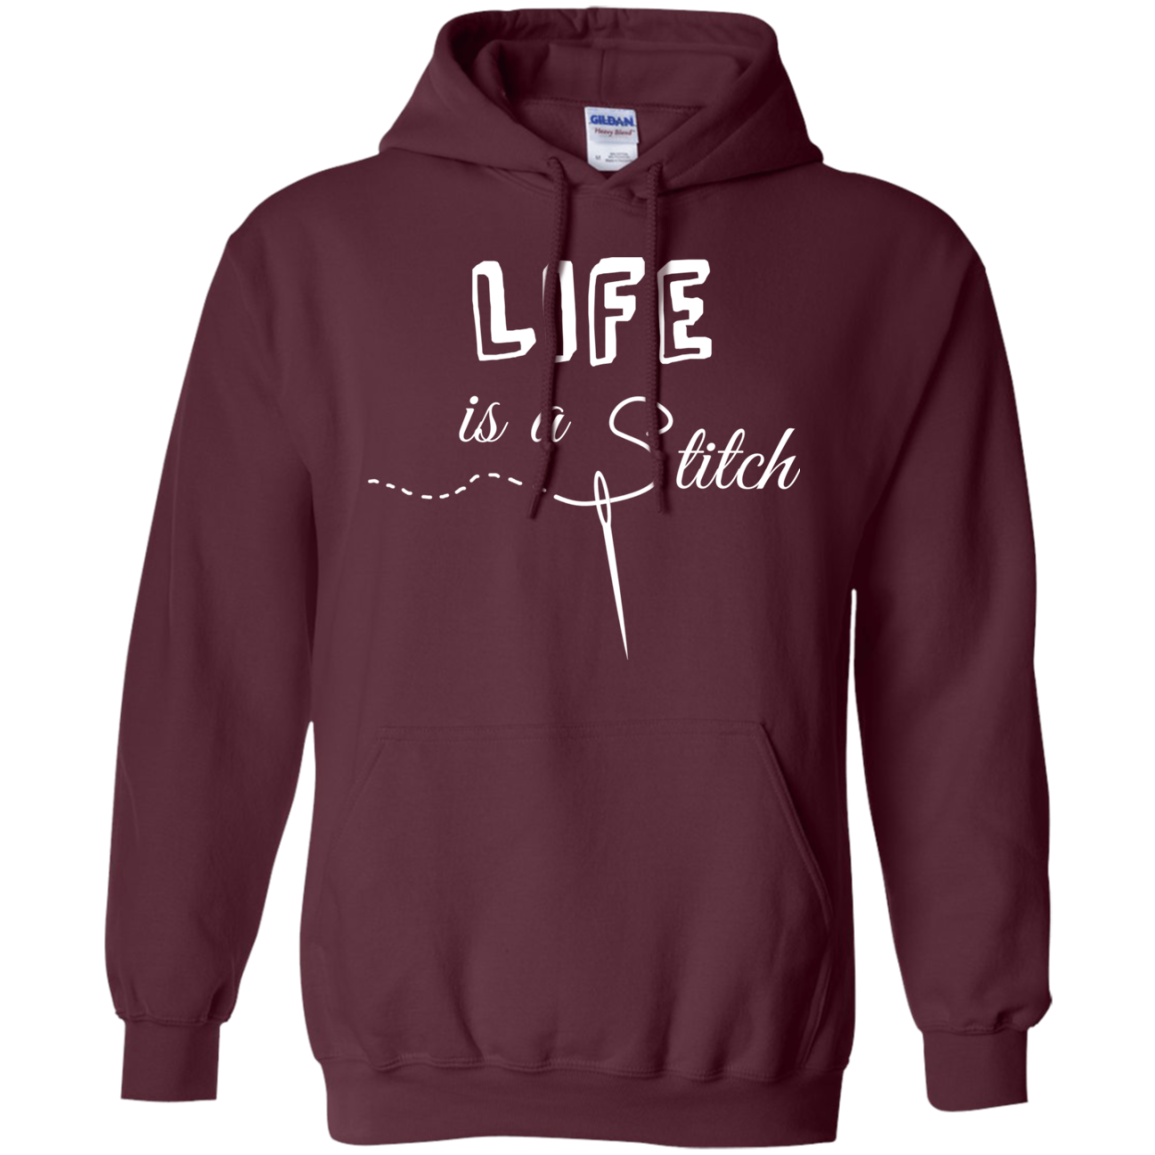 Life is a Stitch Pullover Hoodie